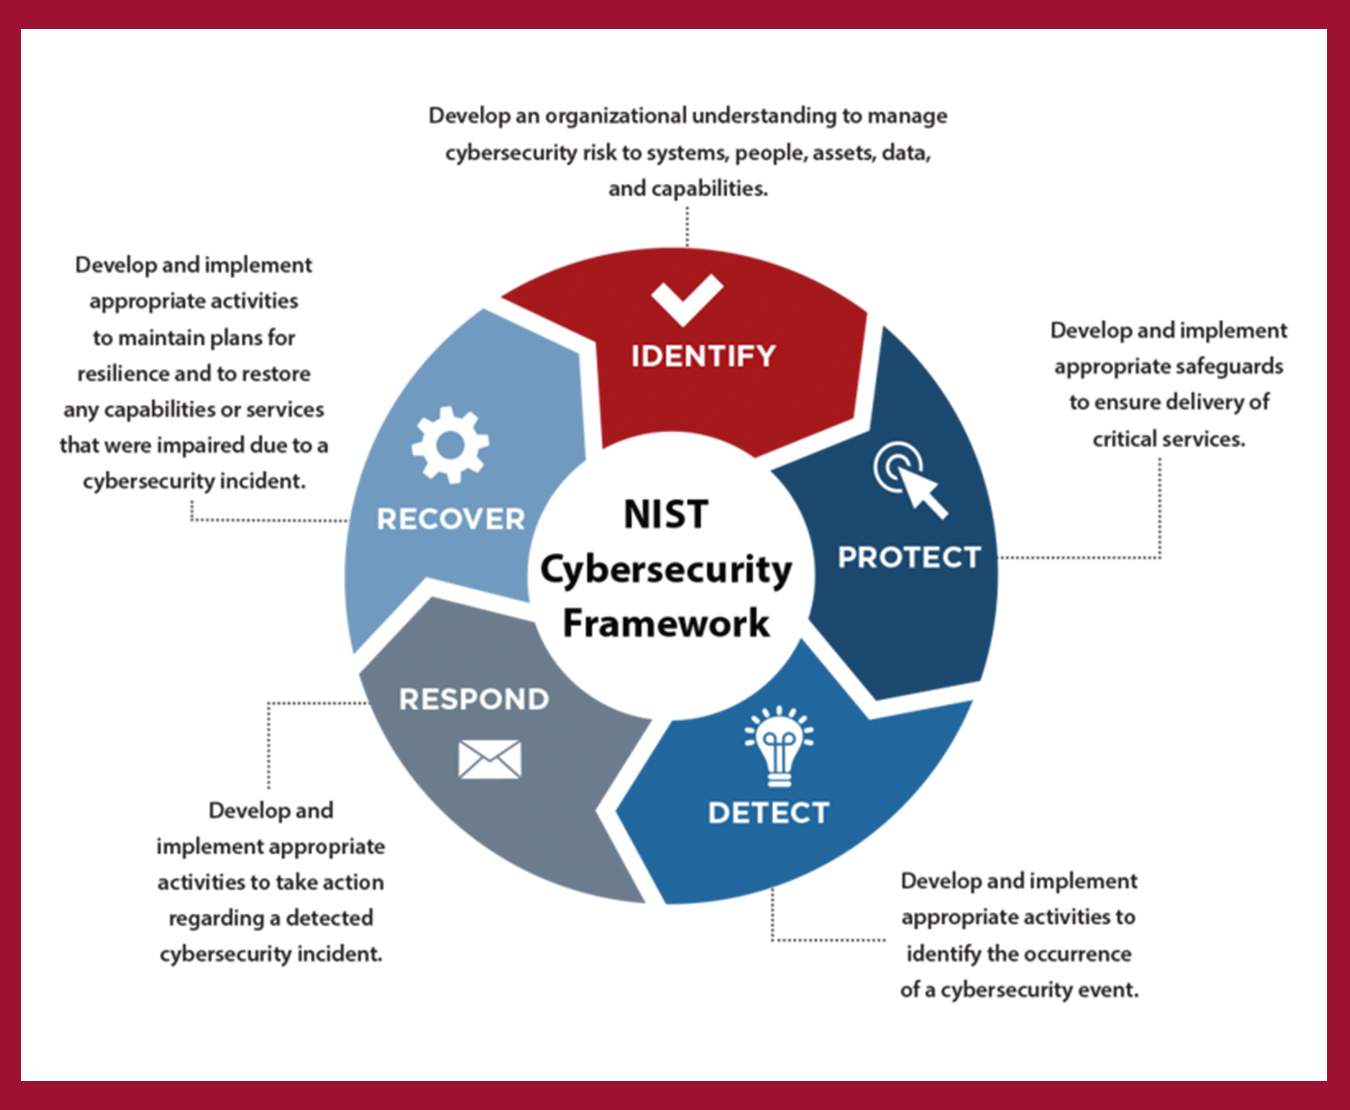 Managing Manufacturing Cybersecurity Threats requires a strategc approach. This 5 step assessment diagram from NIST guides manufacturers through the response steps: Identify, Protect, Detect, Respond, Recover